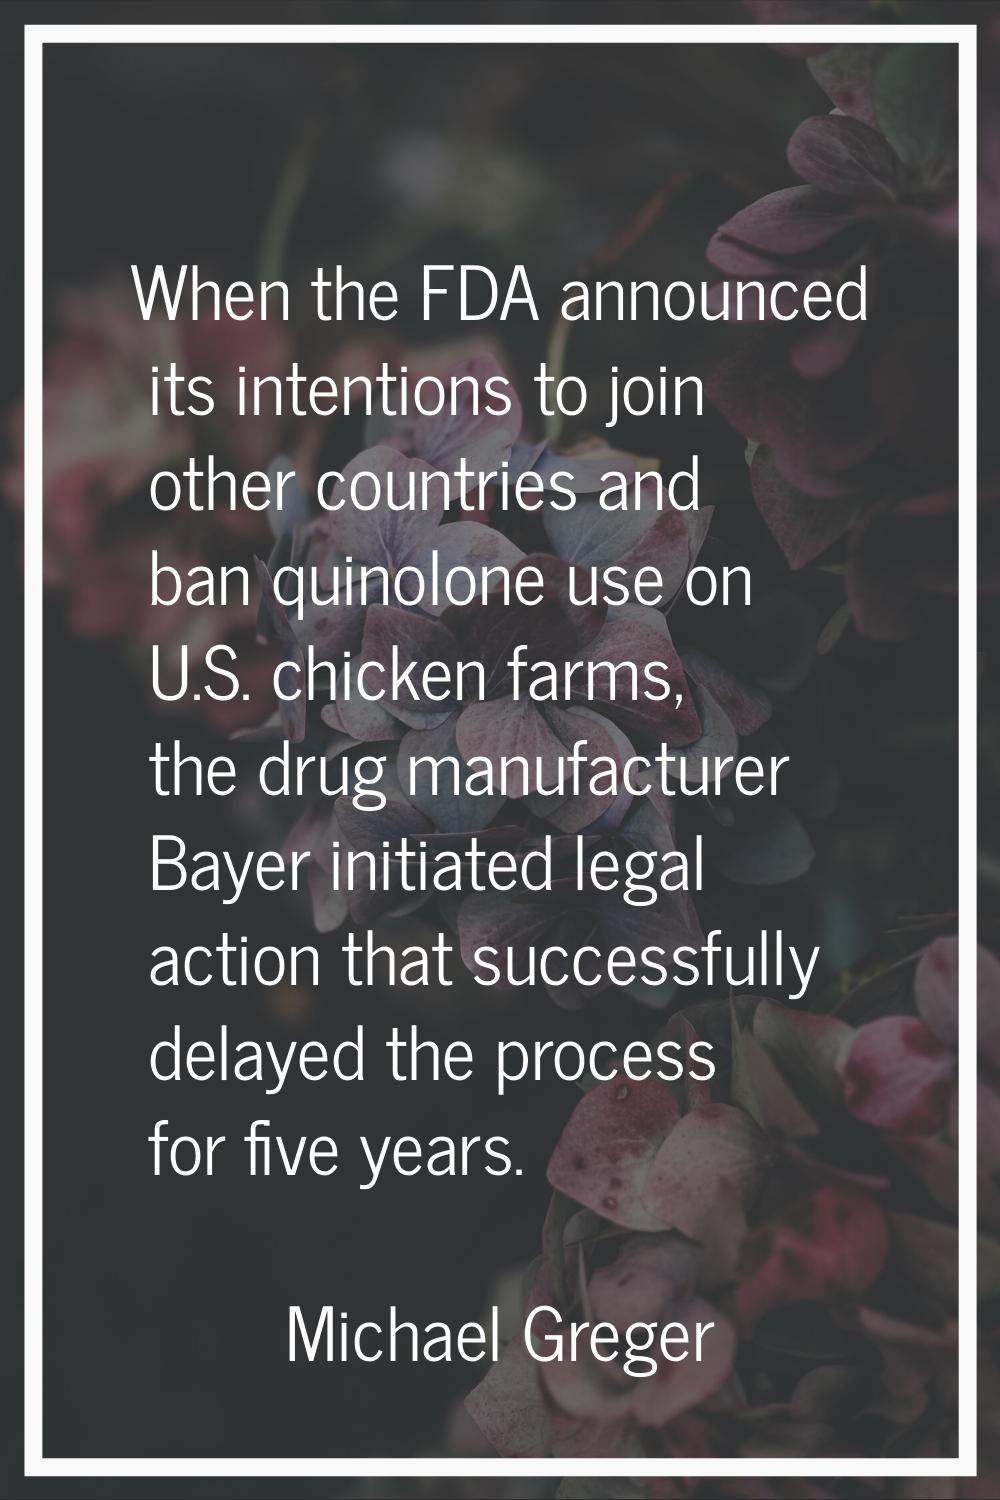 When the FDA announced its intentions to join other countries and ban quinolone use on U.S. chicken